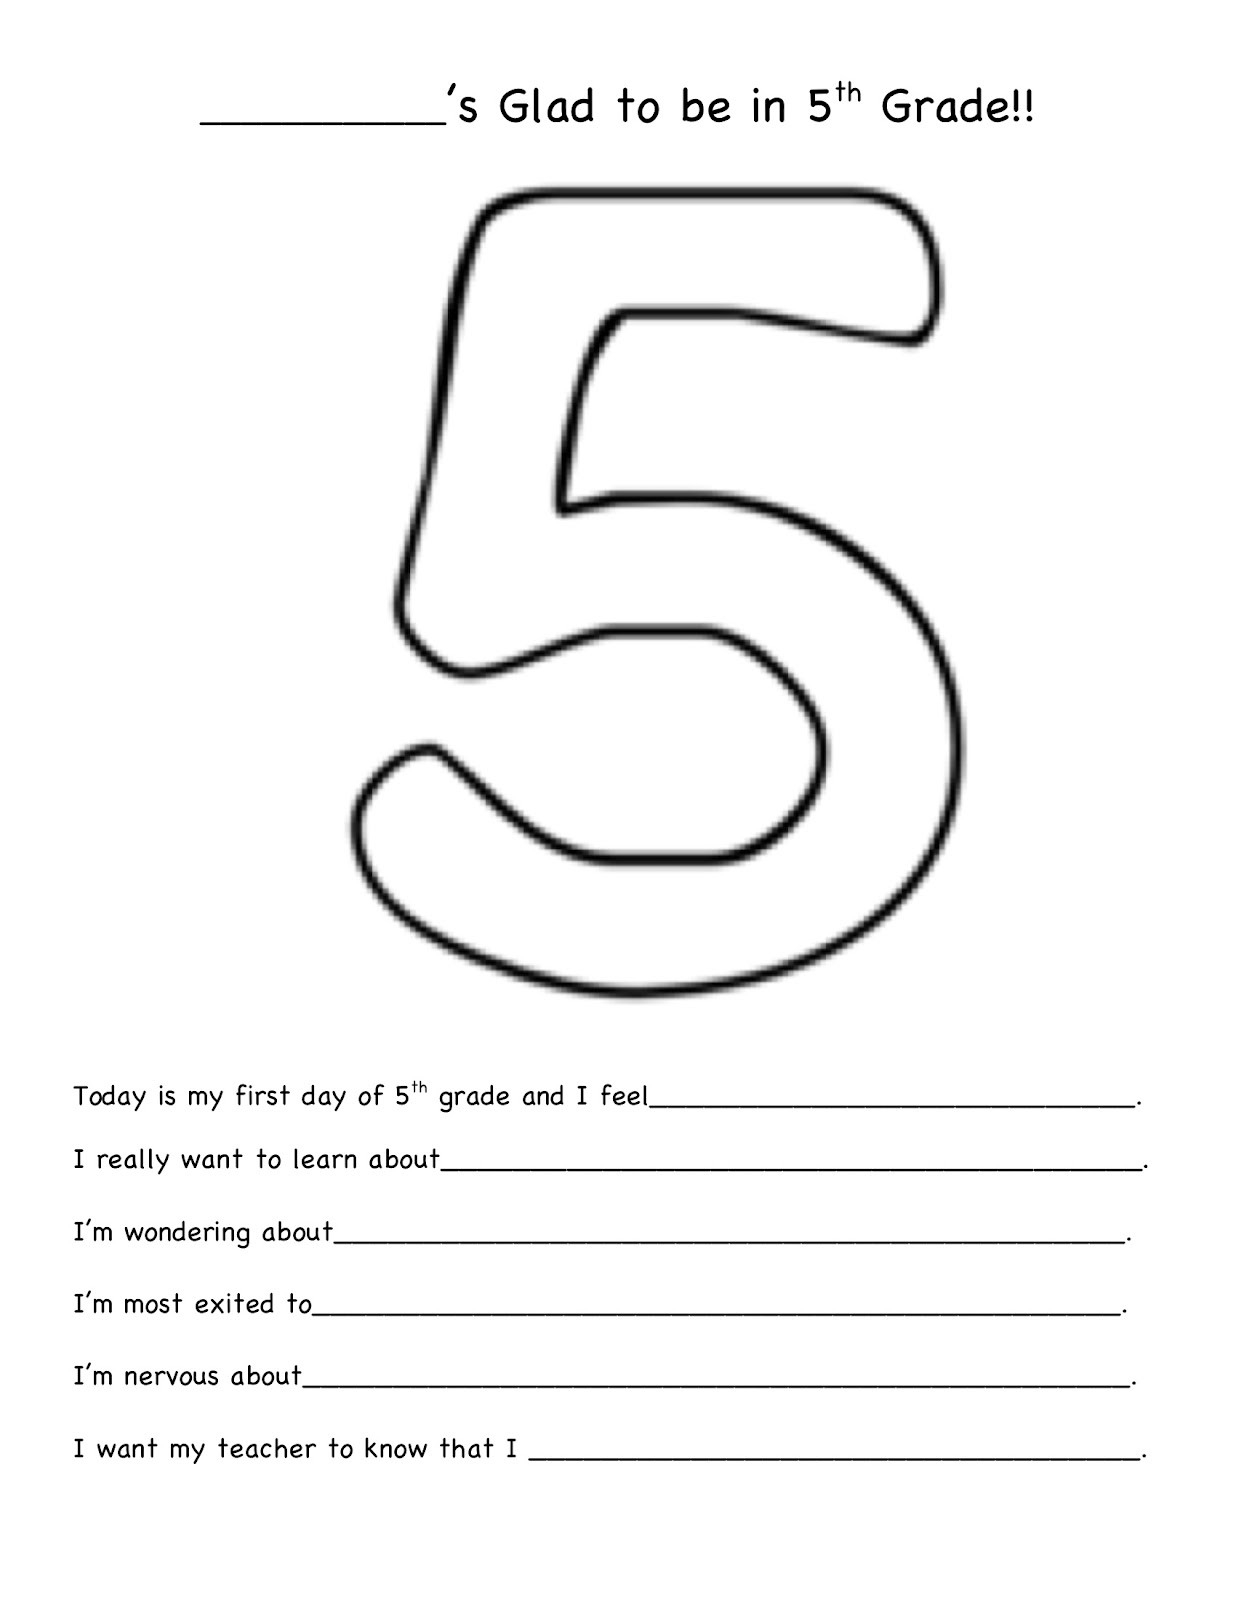 fun-worksheets-for-5th-grade-db-excel